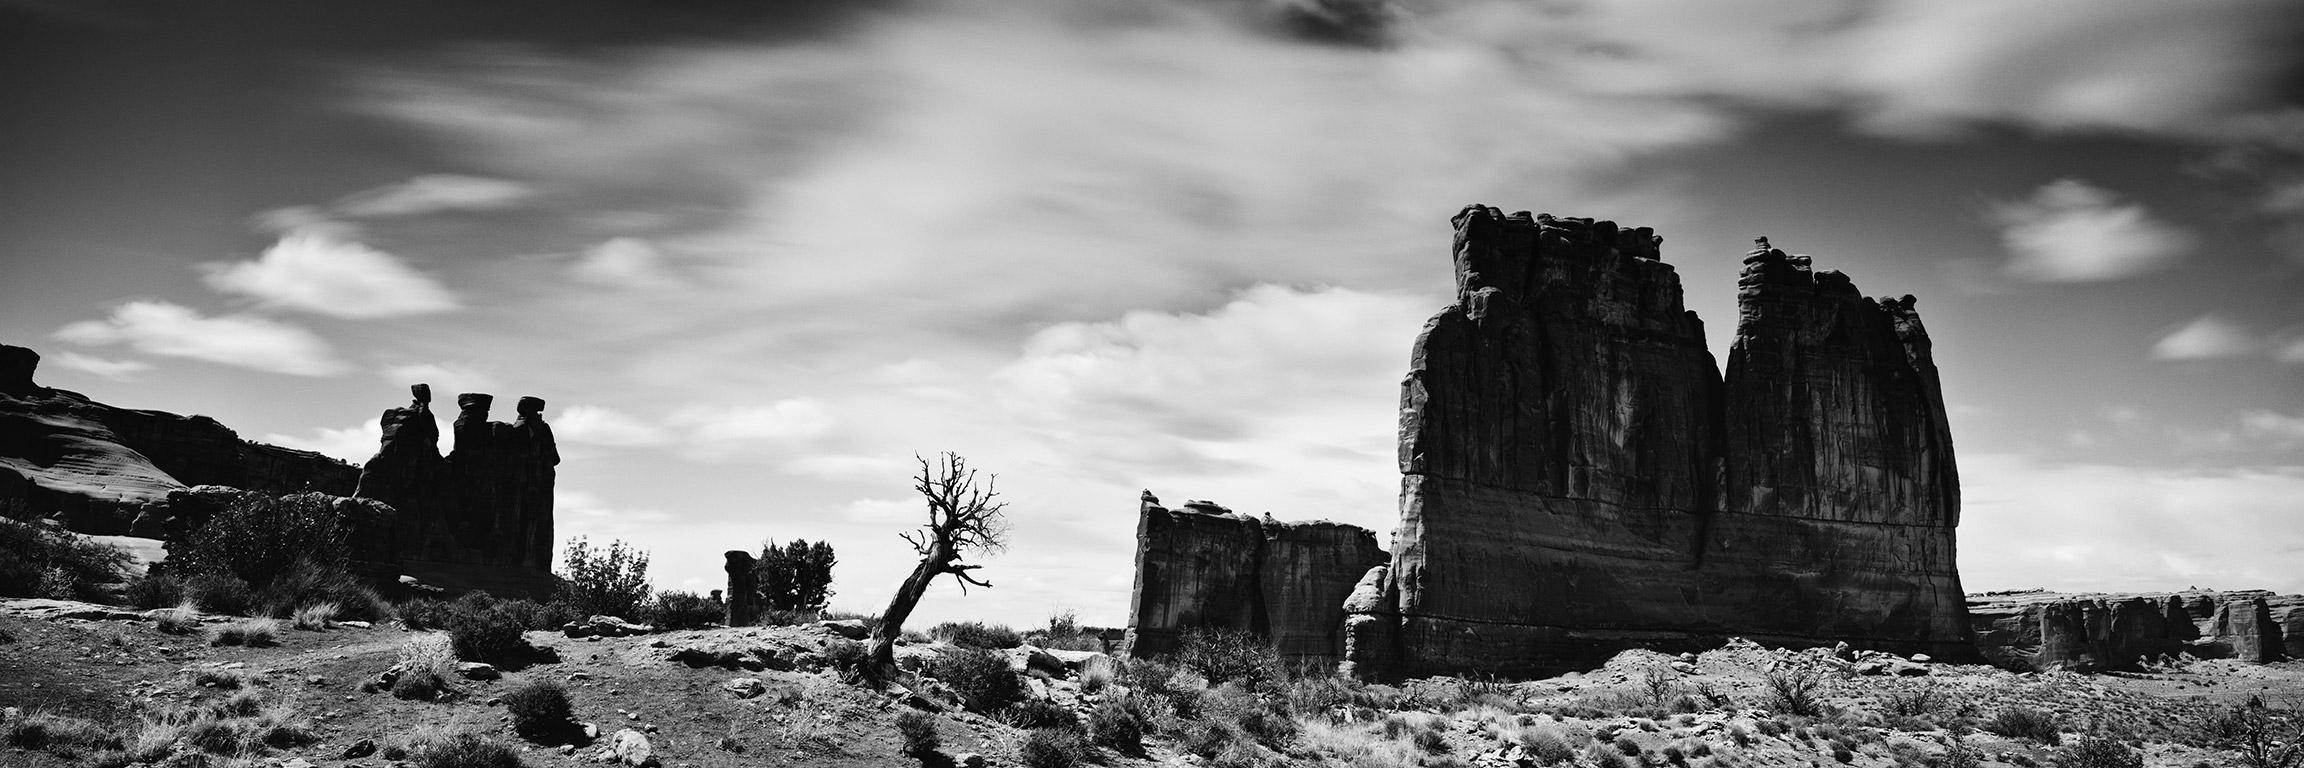 Gerald Berghammer Black and White Photograph - Wild West Panorama, Arches Park, Utah, USA, black & white landscape photography